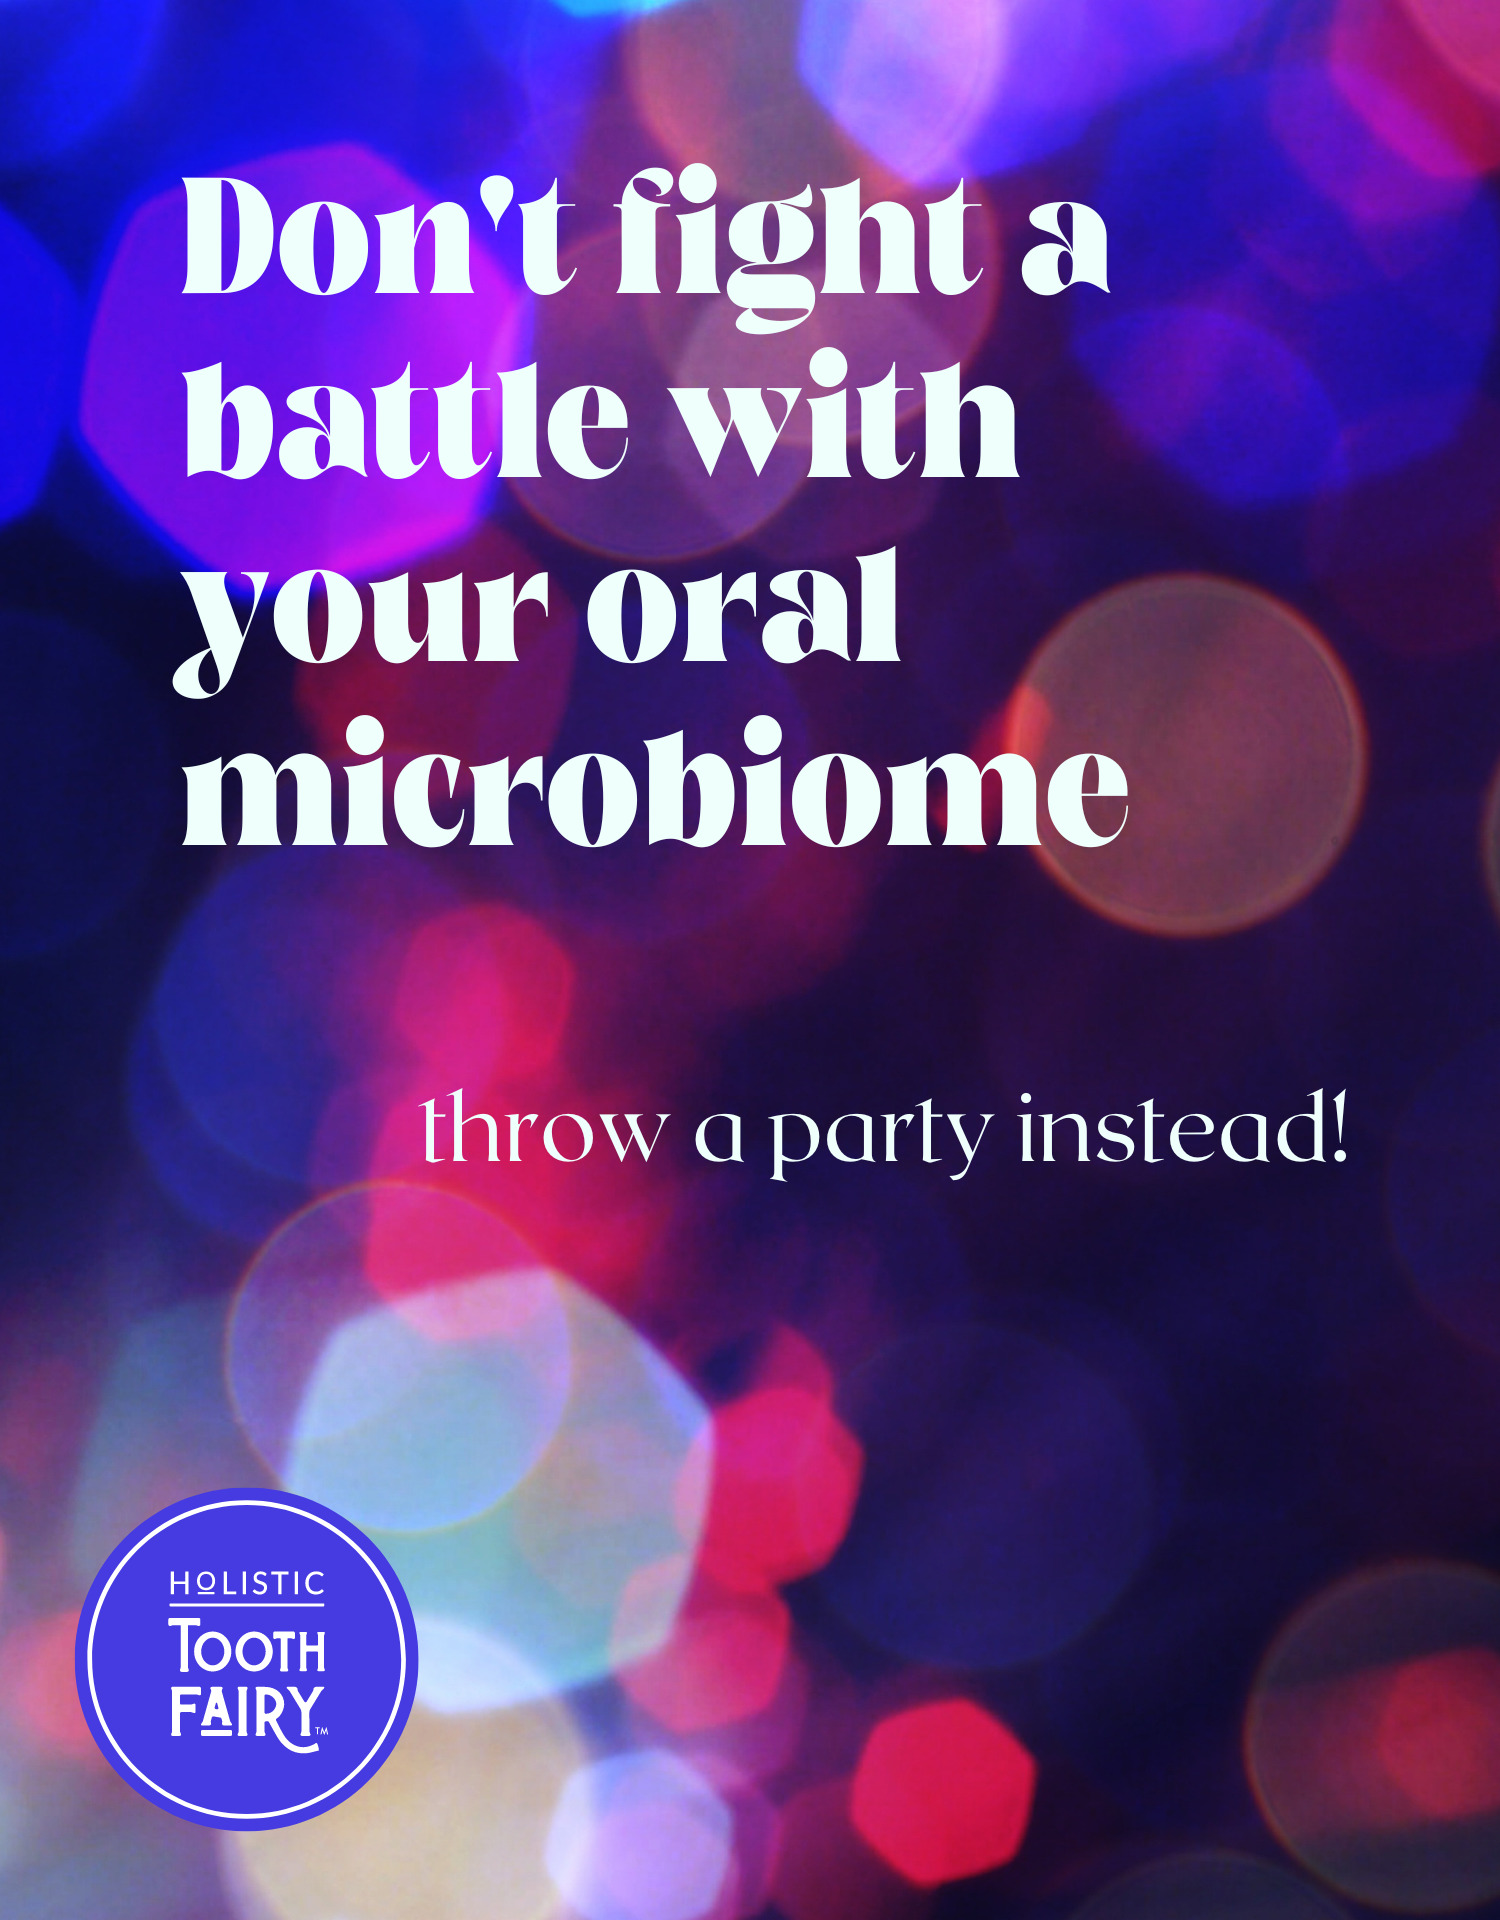 Don't battle your oral microbiome